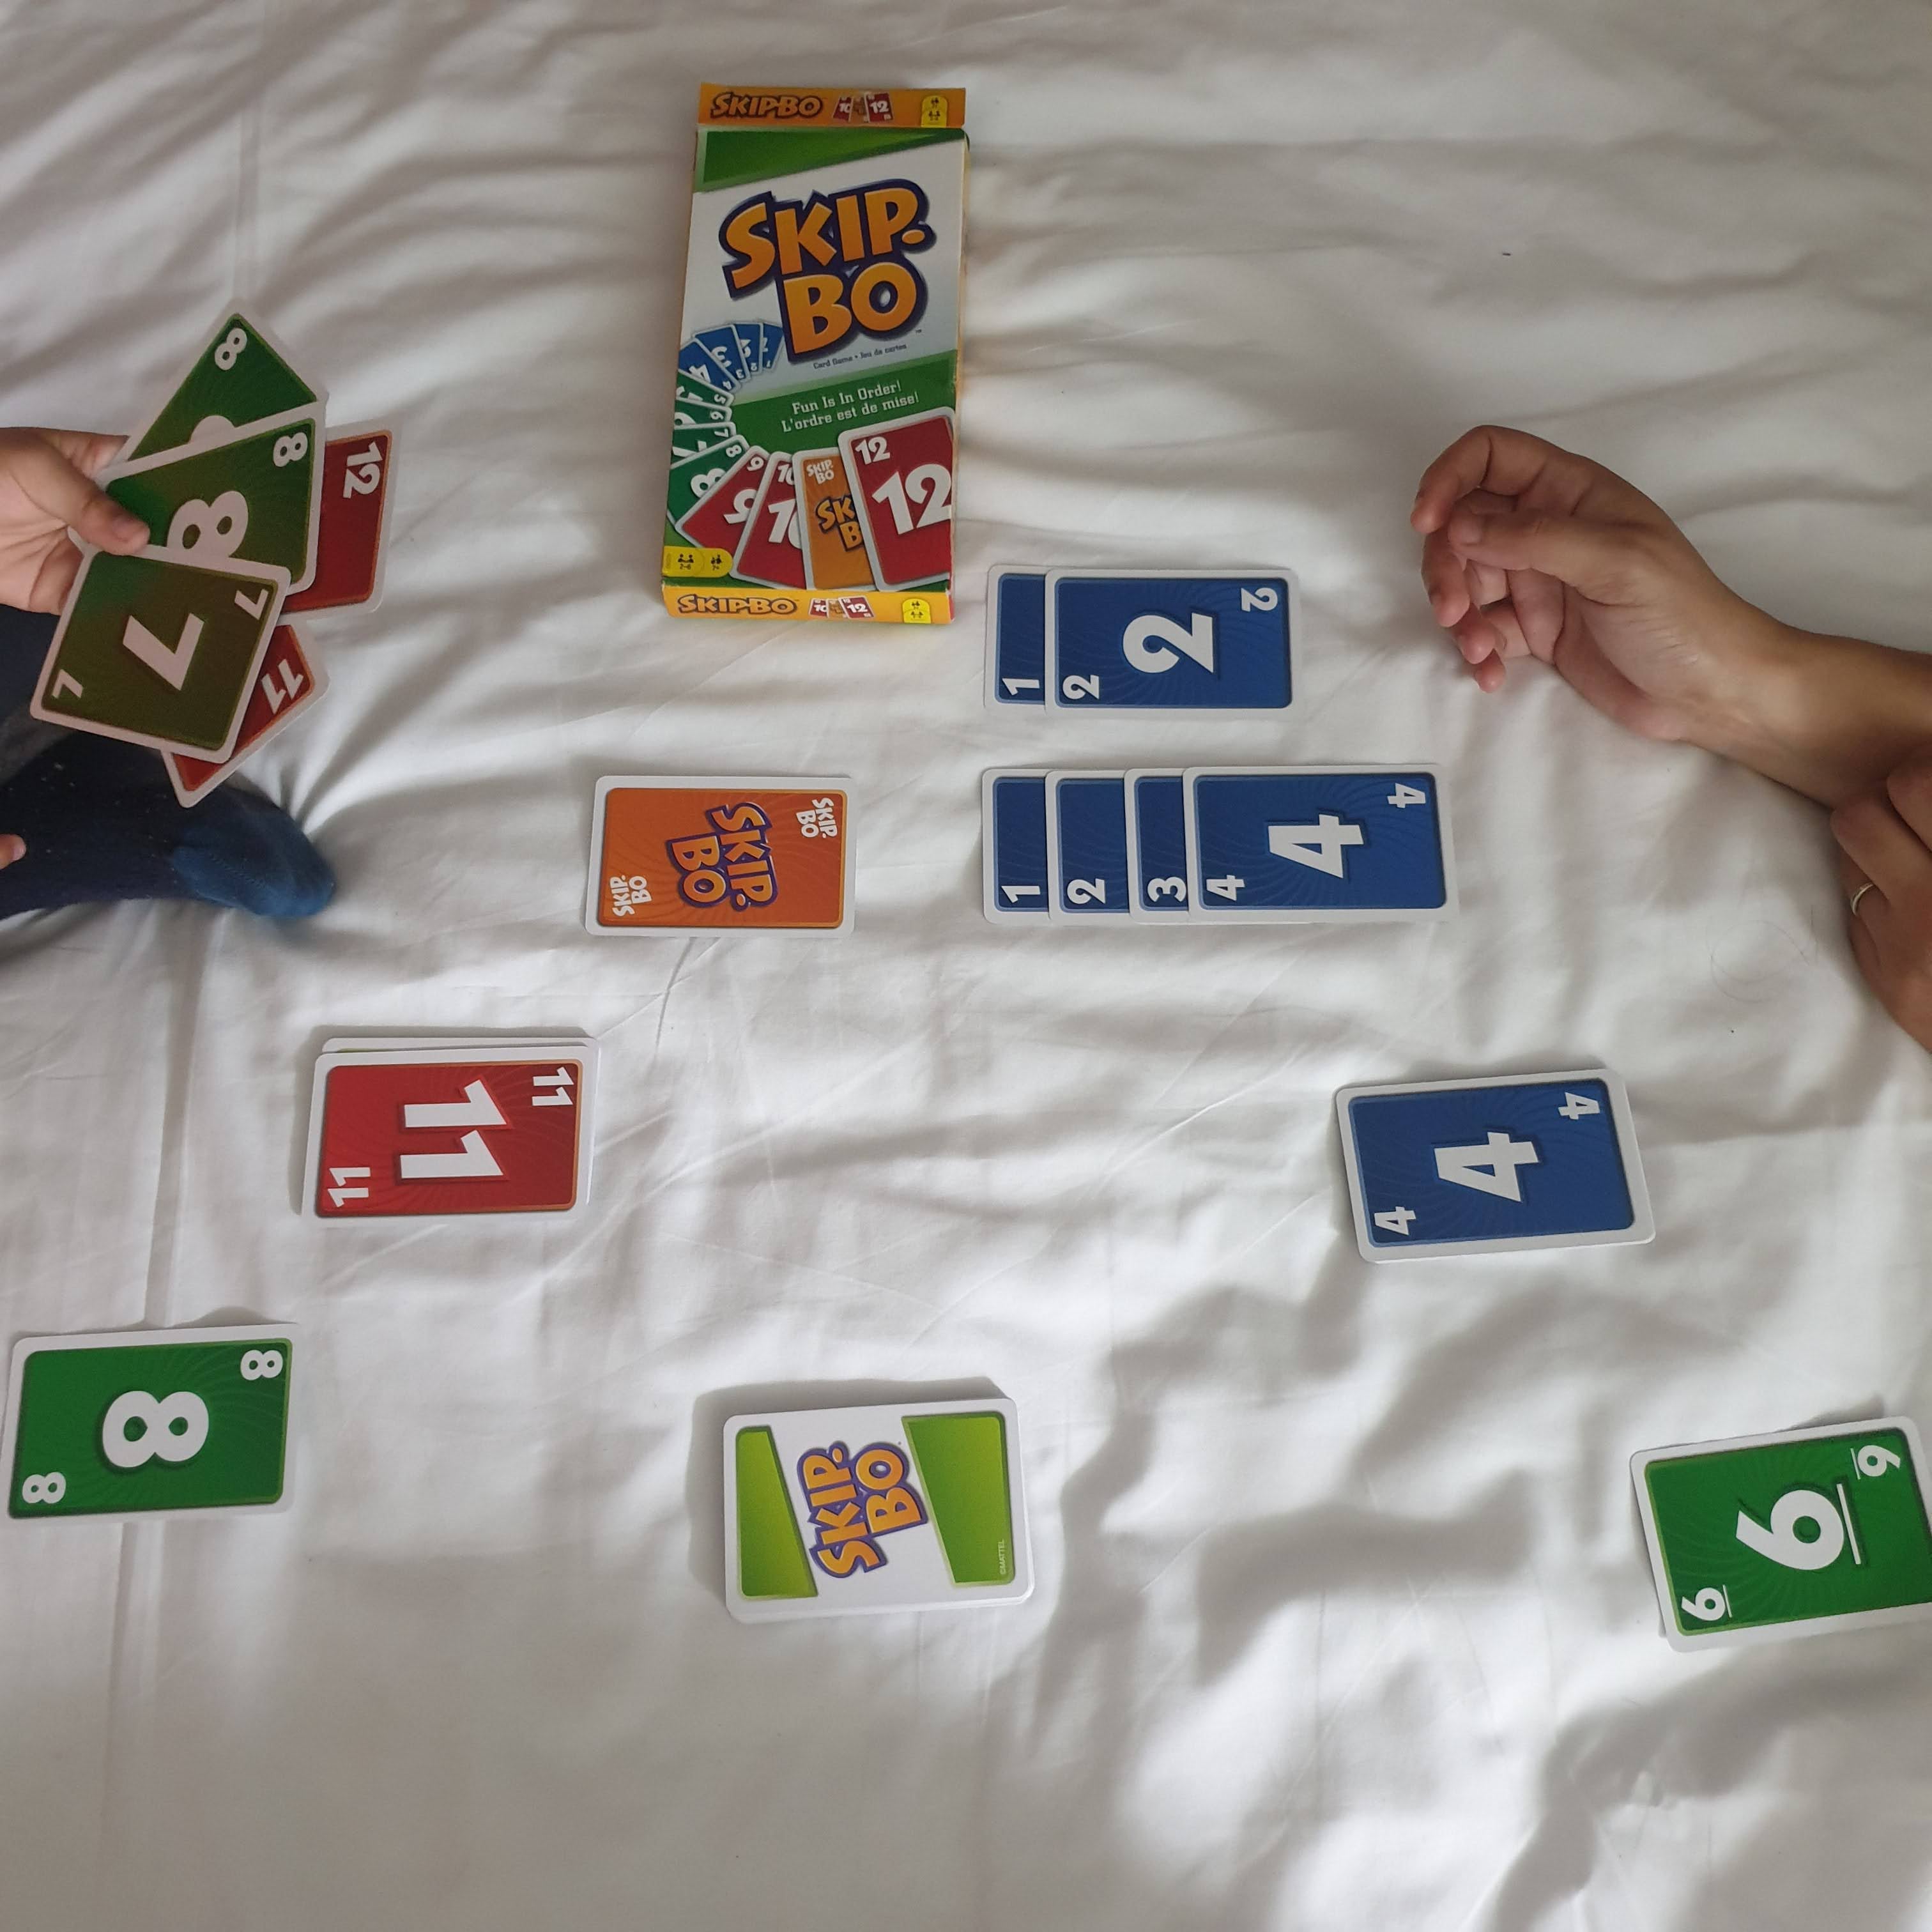 skip bo rules for 4 players